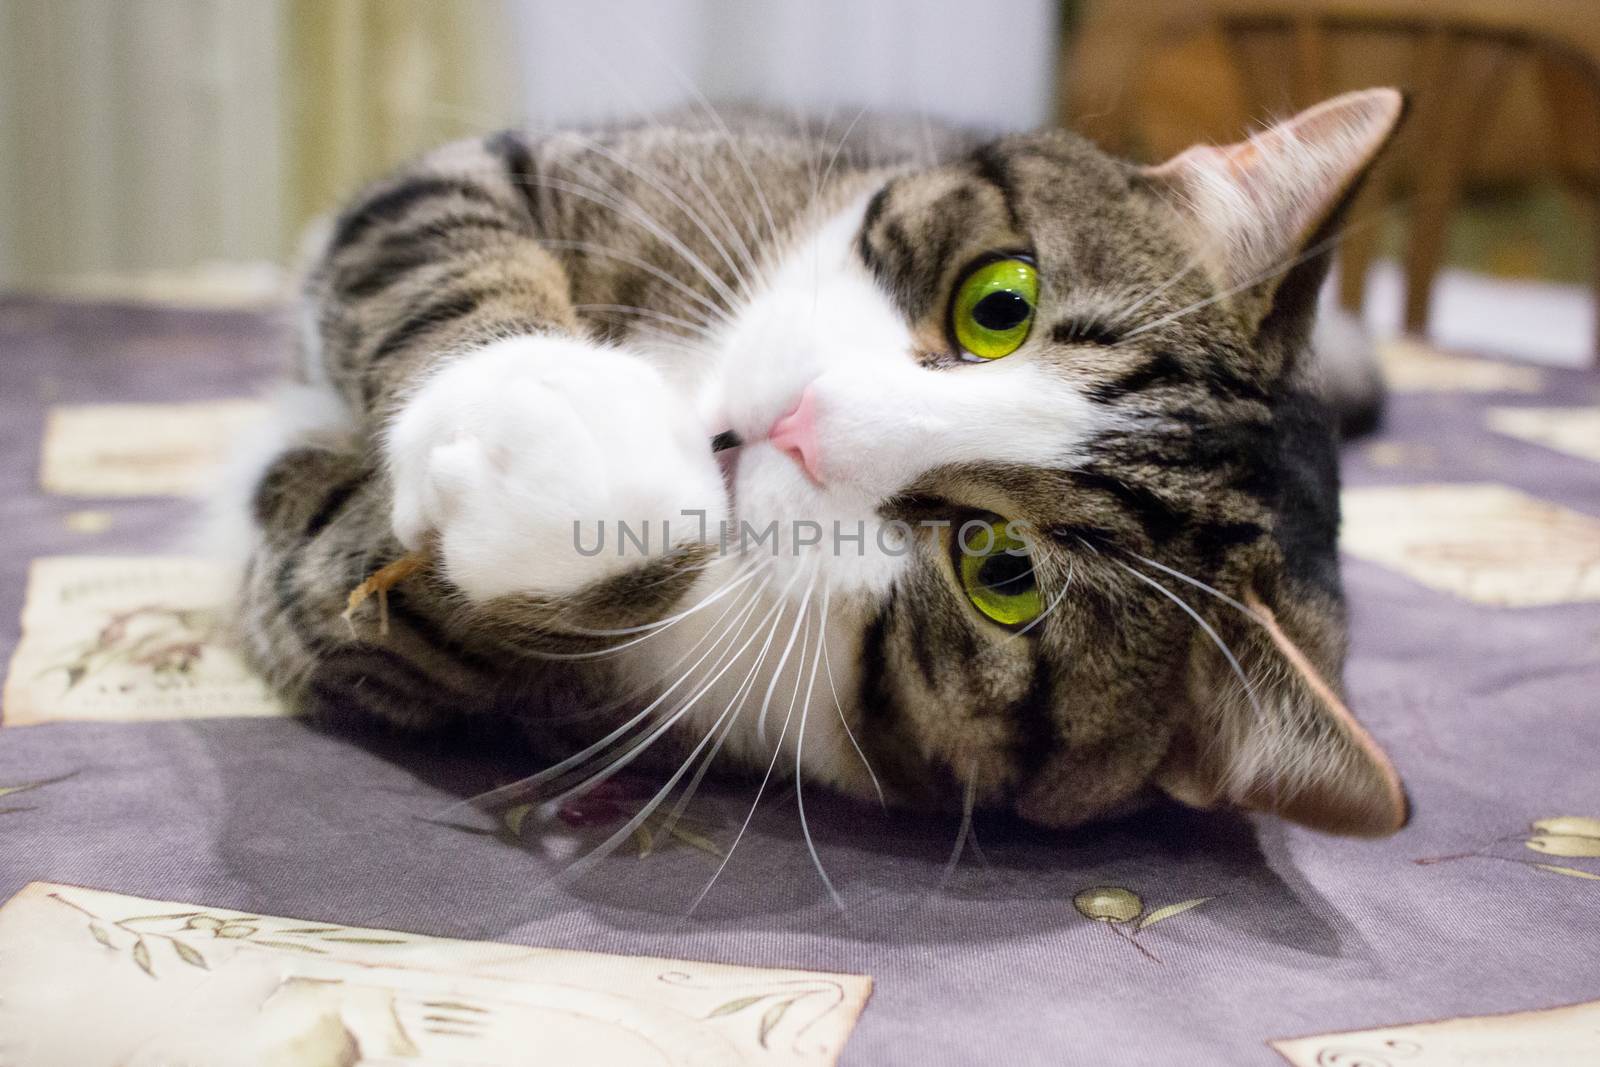 Pet cat with bright green eyes poses on table lying by VeraVerano